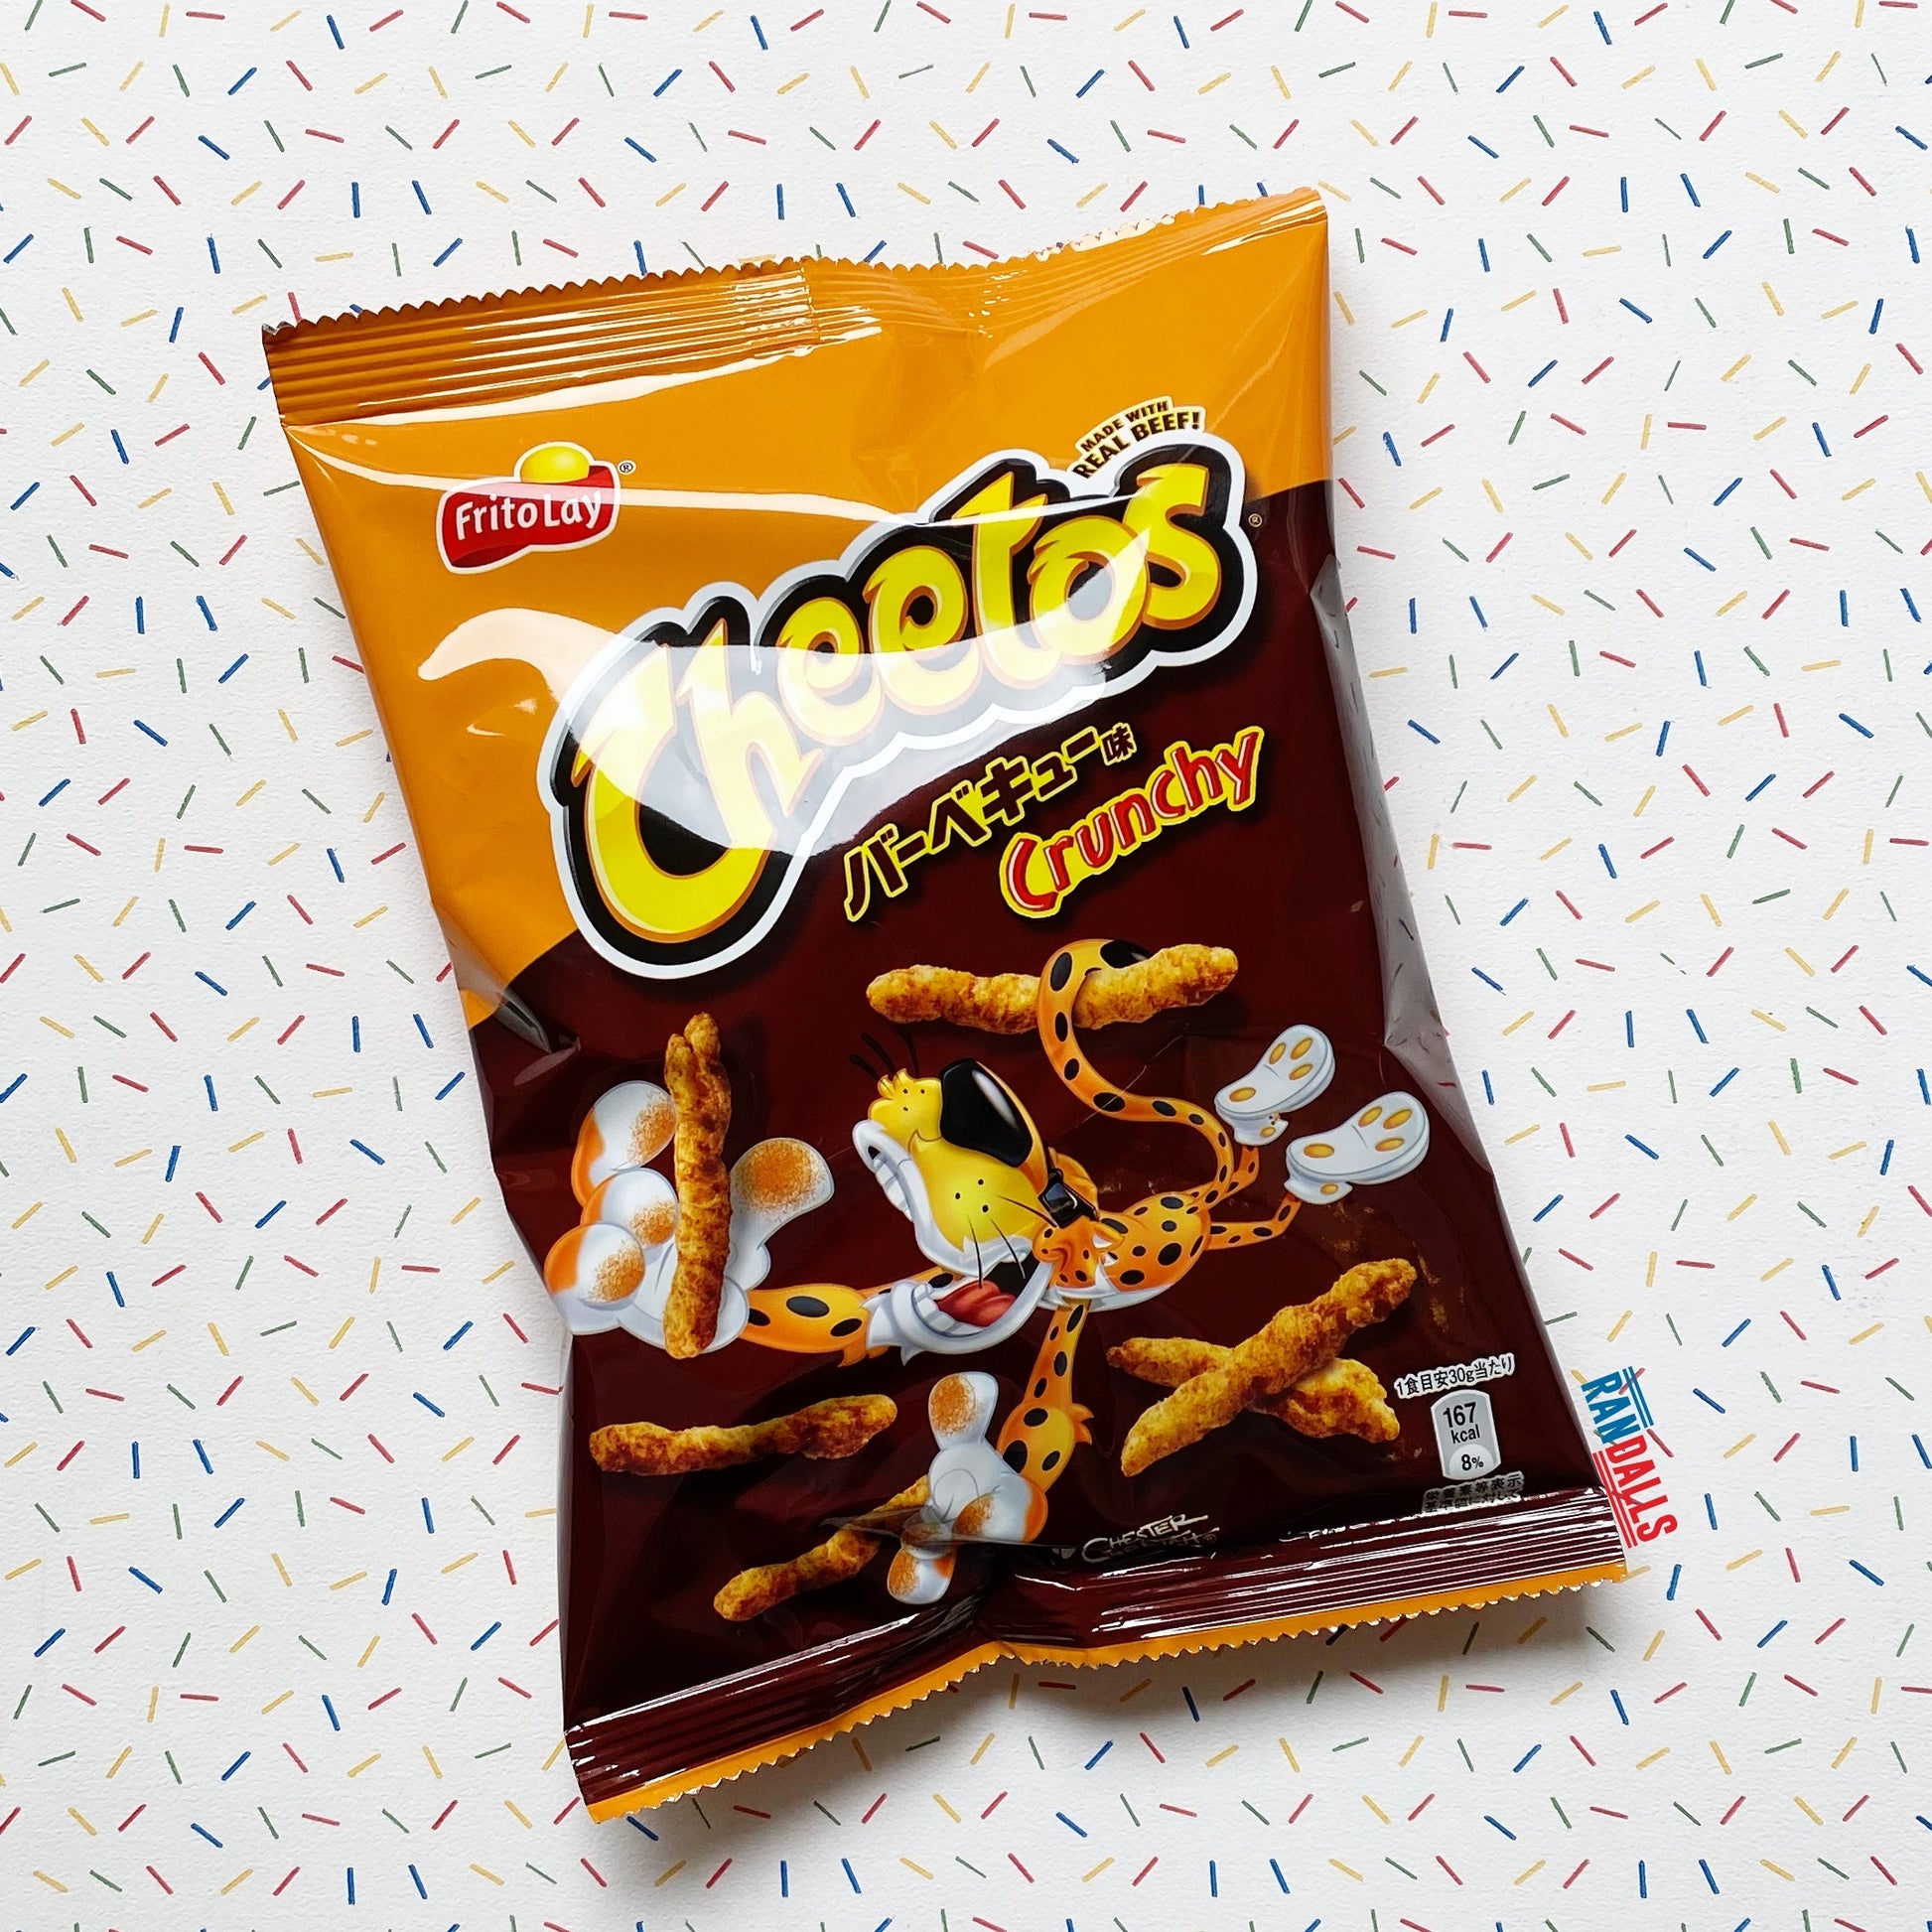 cheetos barbecue, bbq, barbeque, japan, japanese, cheese puffs, crisps, chips, frito lay